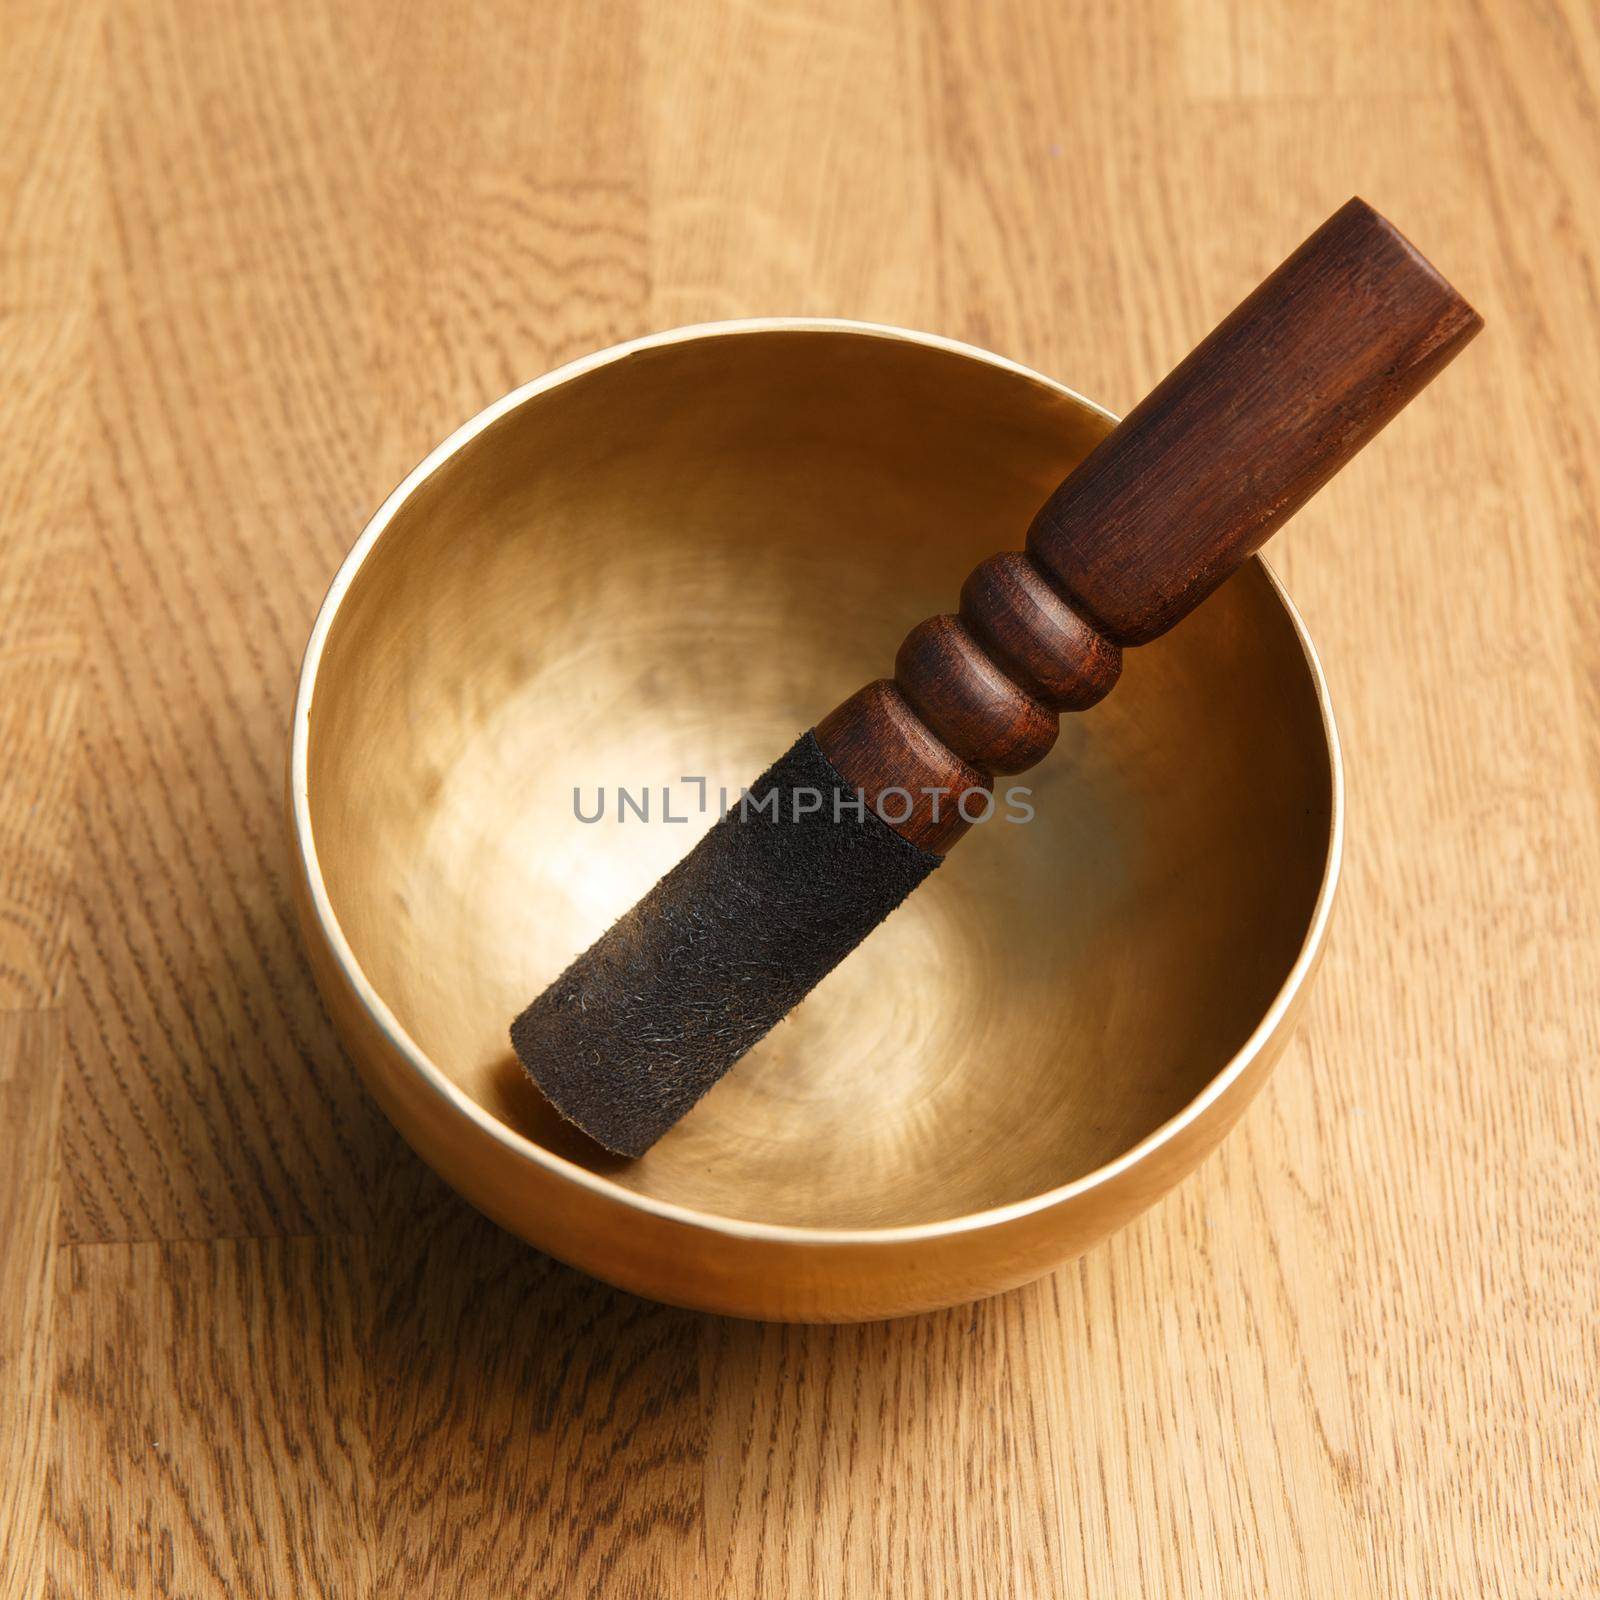 Struck and singing bowl are widely used for music making, meditation and chanting, as well for personal spirituality. They have become popular with music therapists, sound healers and yoga practitioner